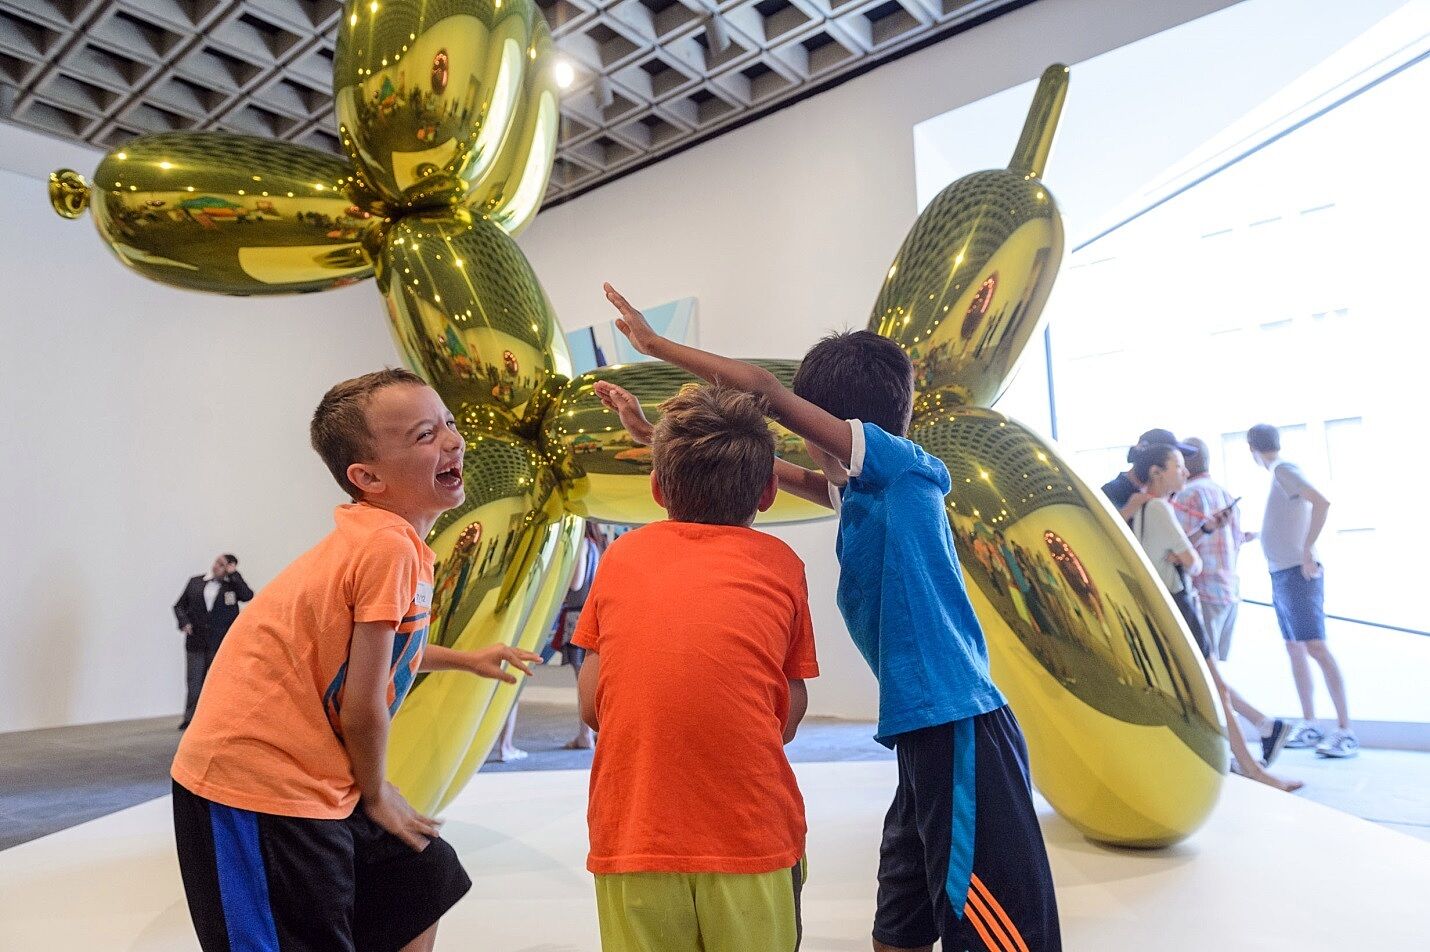 Kids laugh in front of a sculpture of a balloon dog